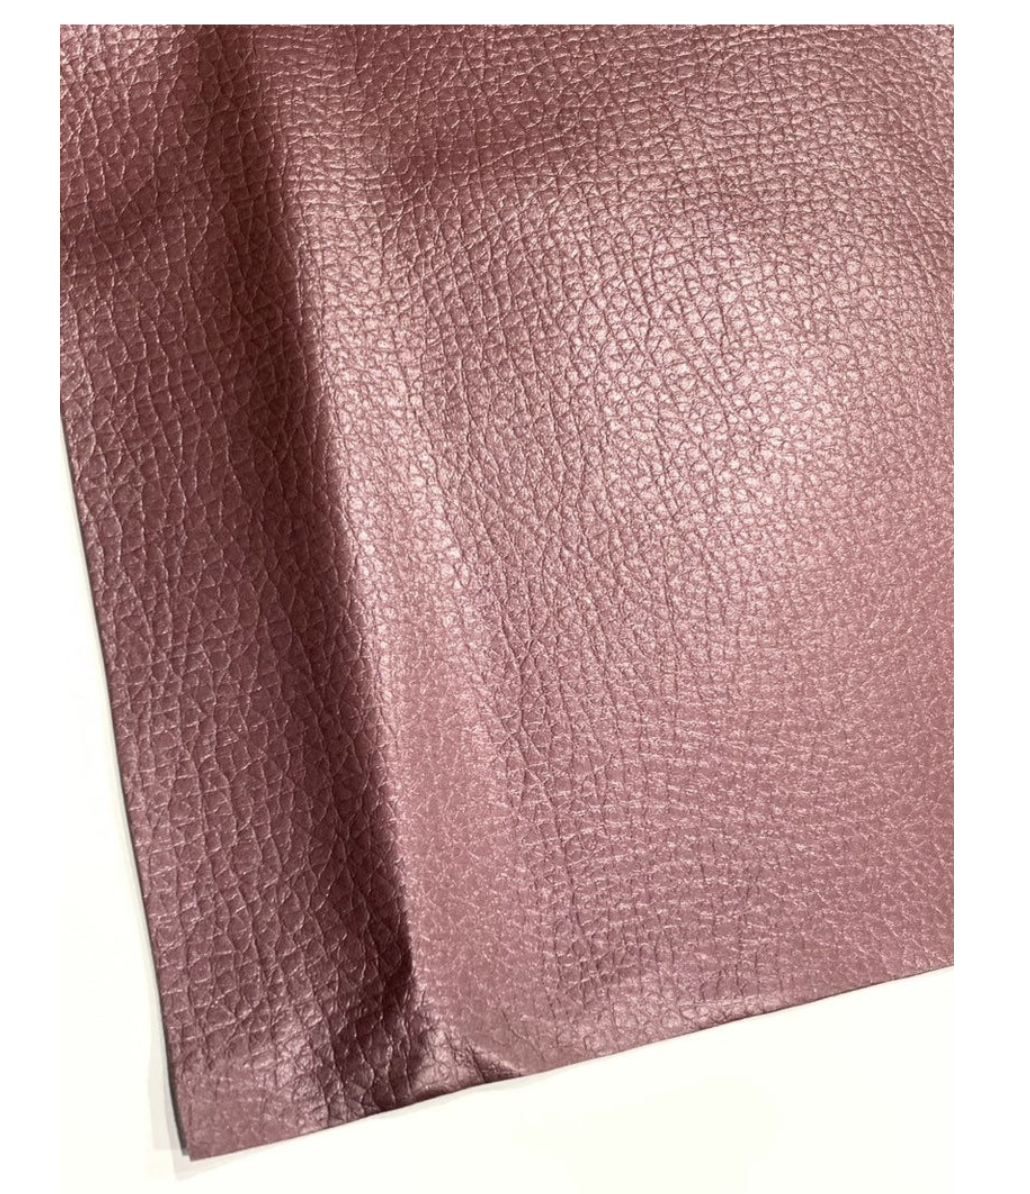 Plum Pearl Leatherette Sheet 0.6mm Thin Leatherette. Perfect for button earrings